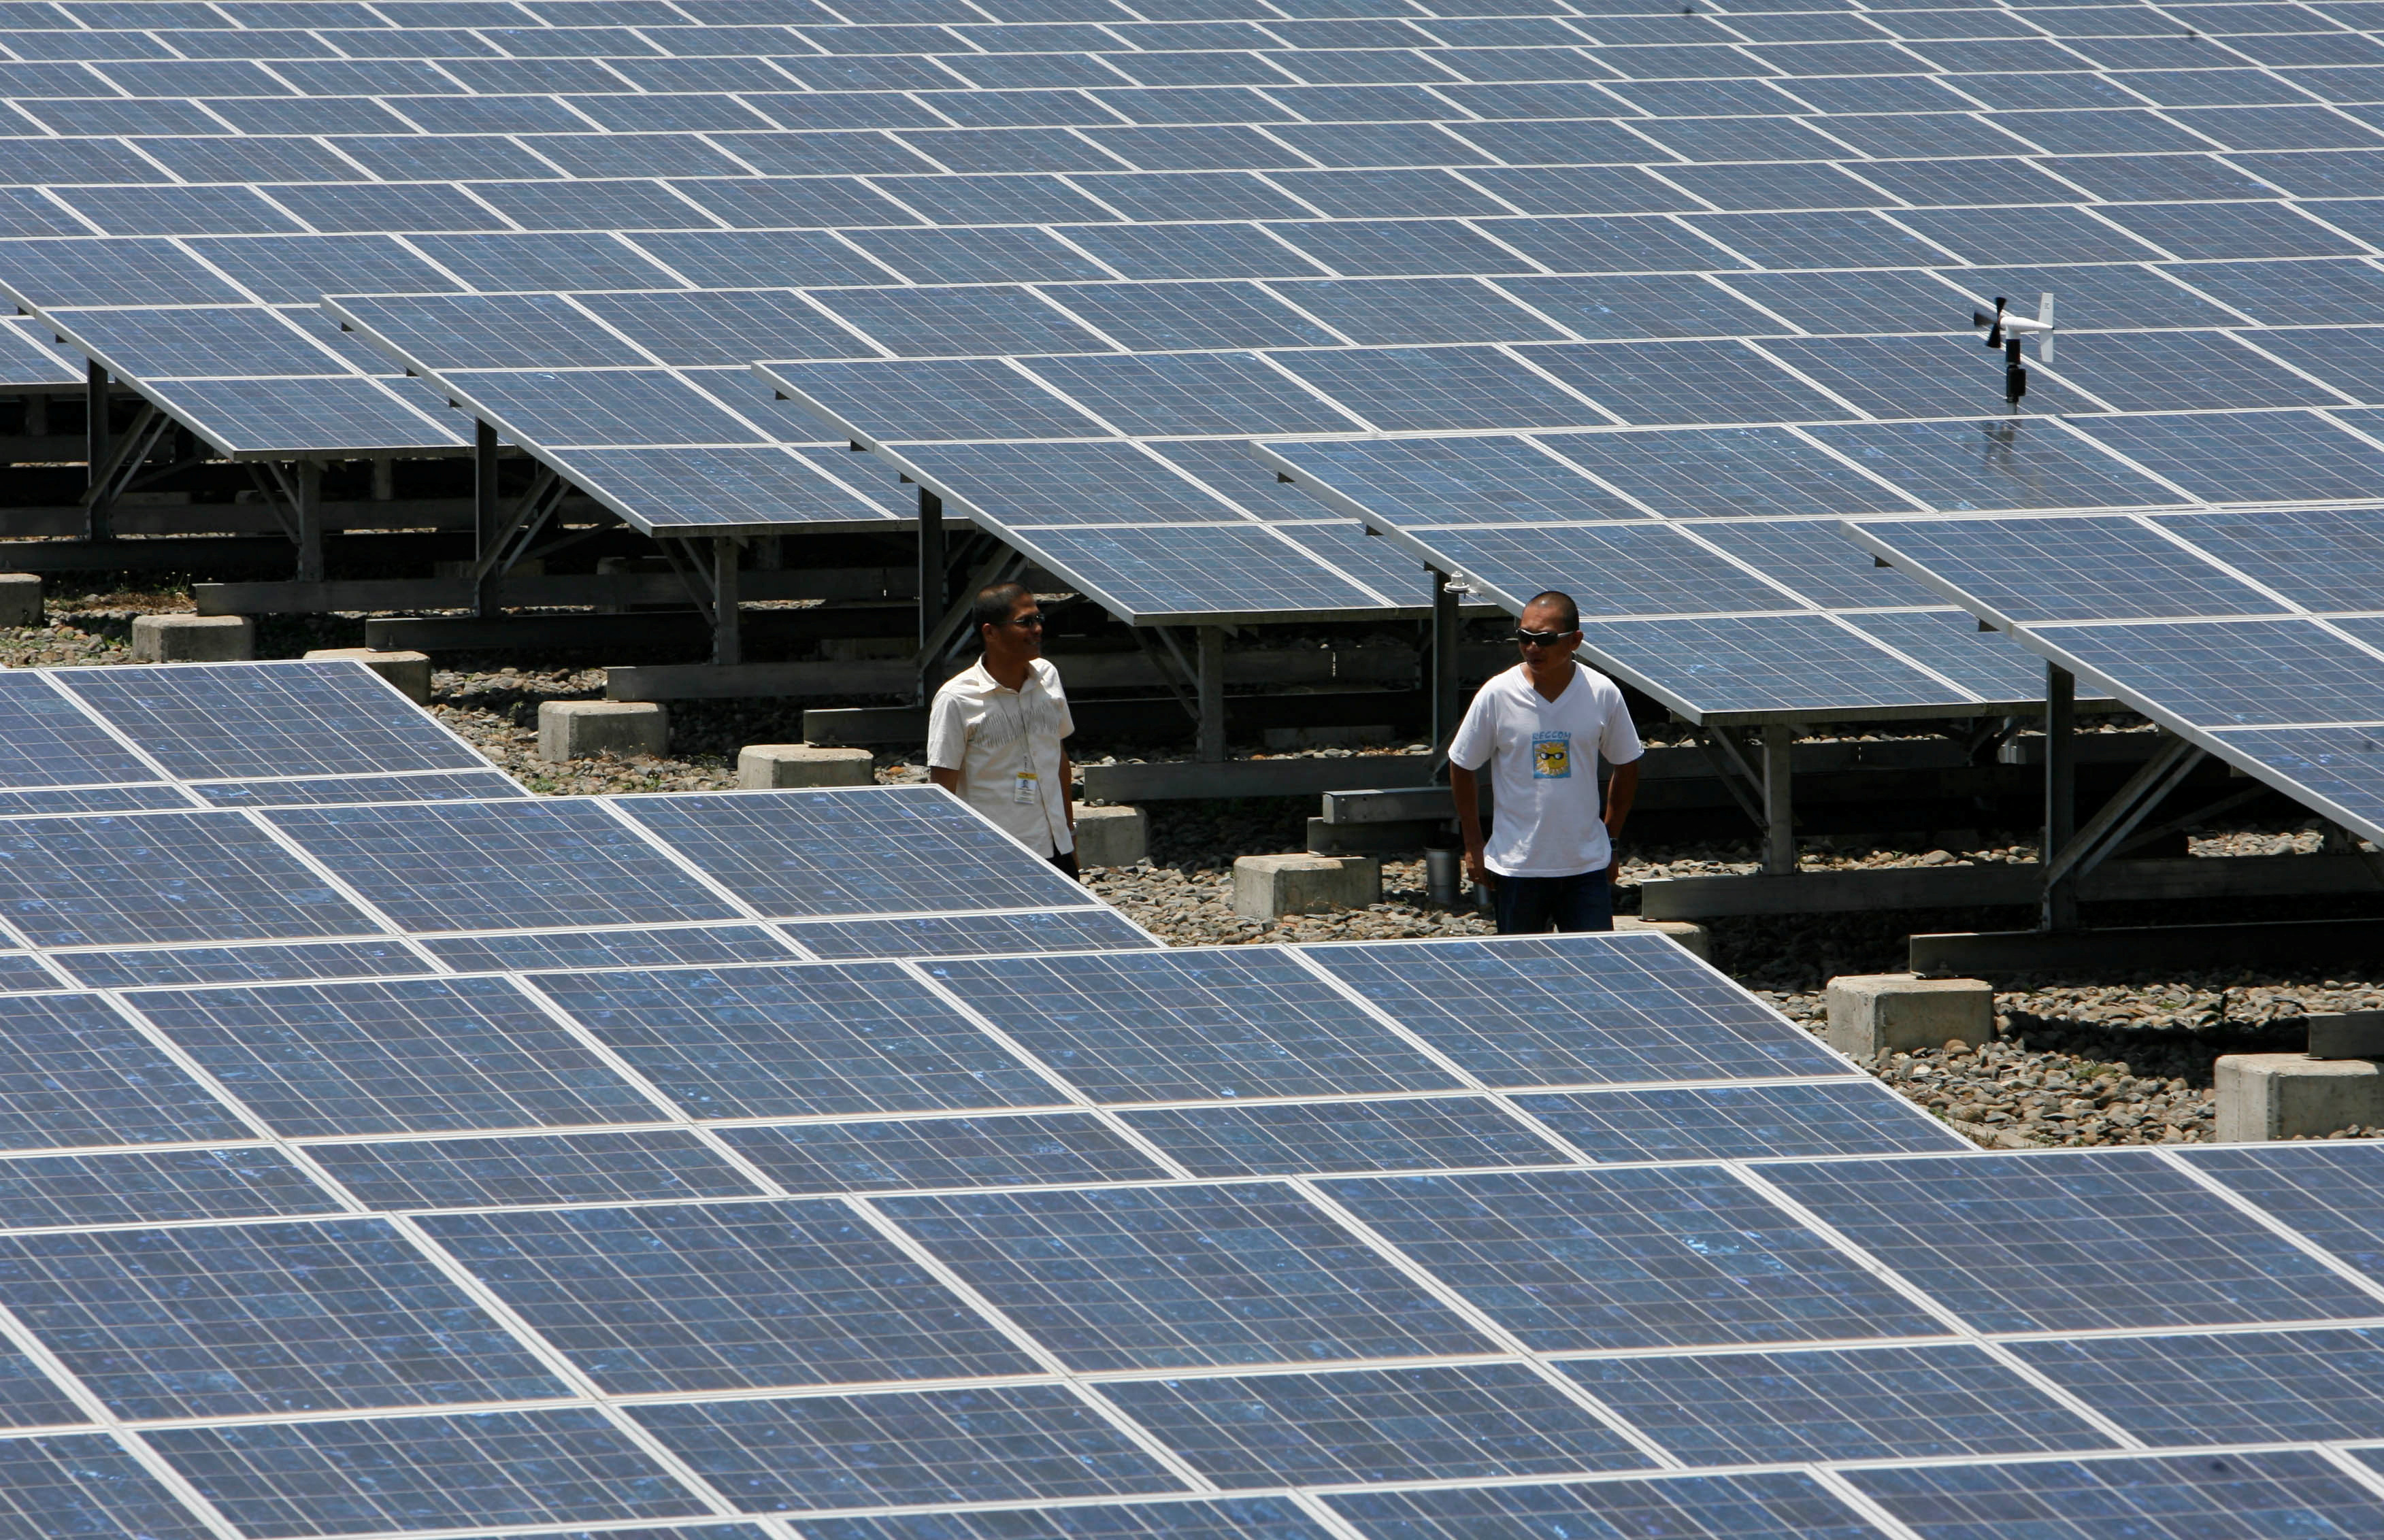 Plant manager of Cagayan Electric Power and Light Co. Inc walks past solar panels installed in Indahag village in Cagayan De Oro